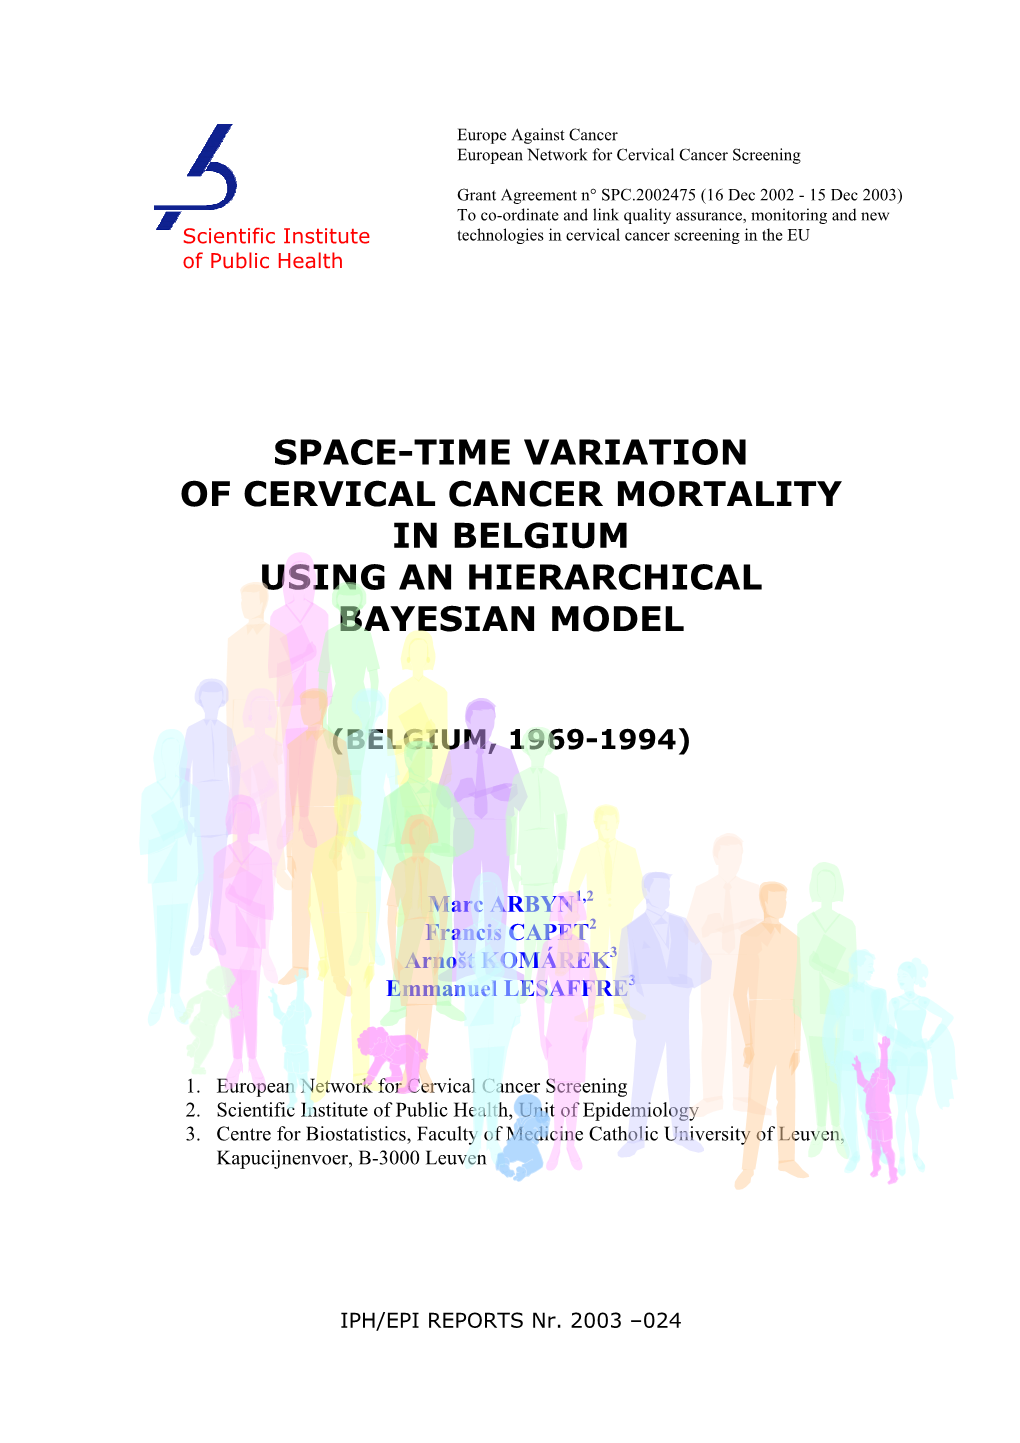 Space-Time Variation of Cervical Cancer Mortality in Belgium Using an Hierarchical Bayesian Model